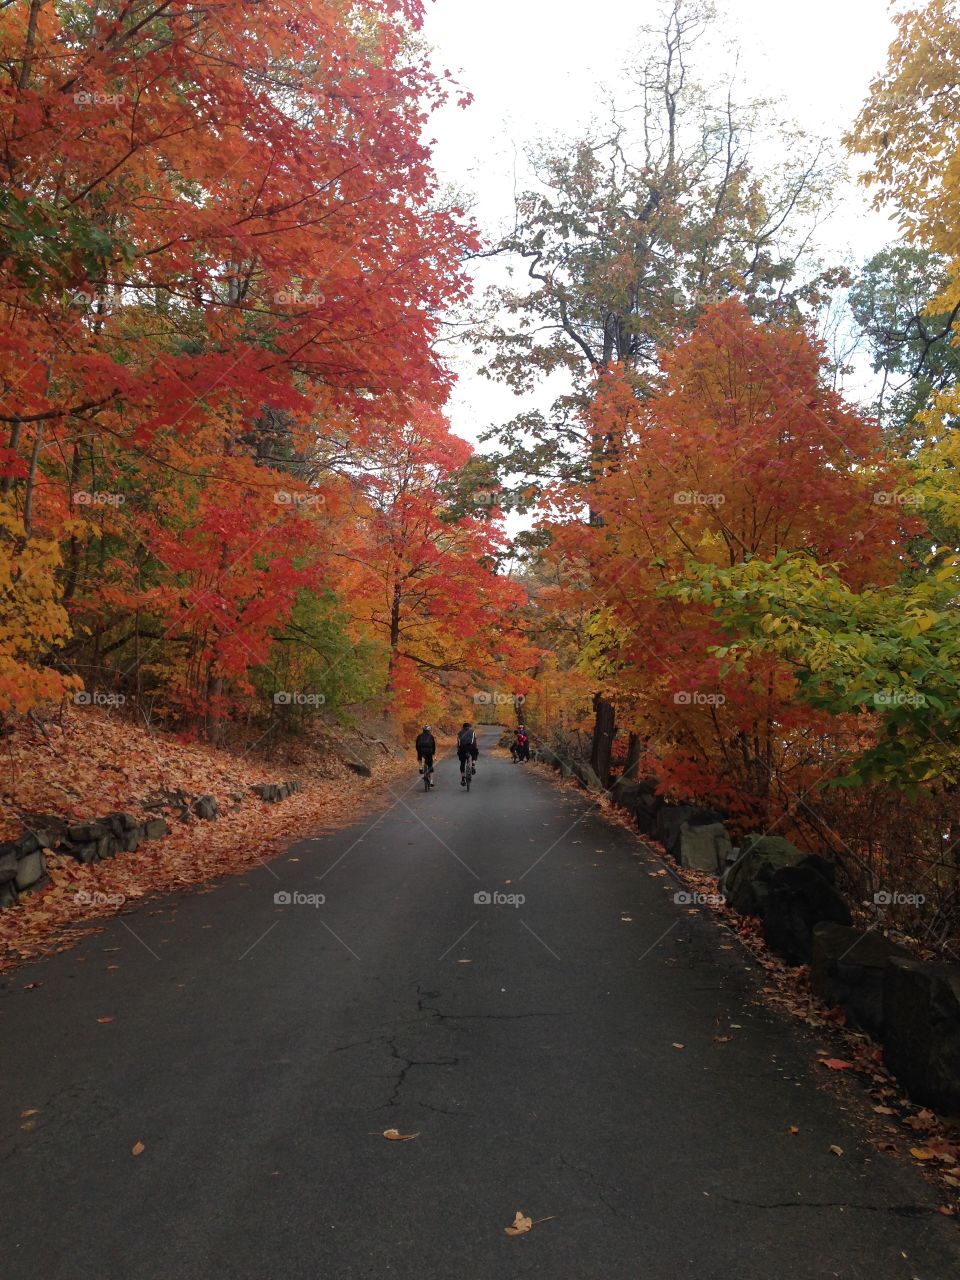 Fall colors in Palisades Park